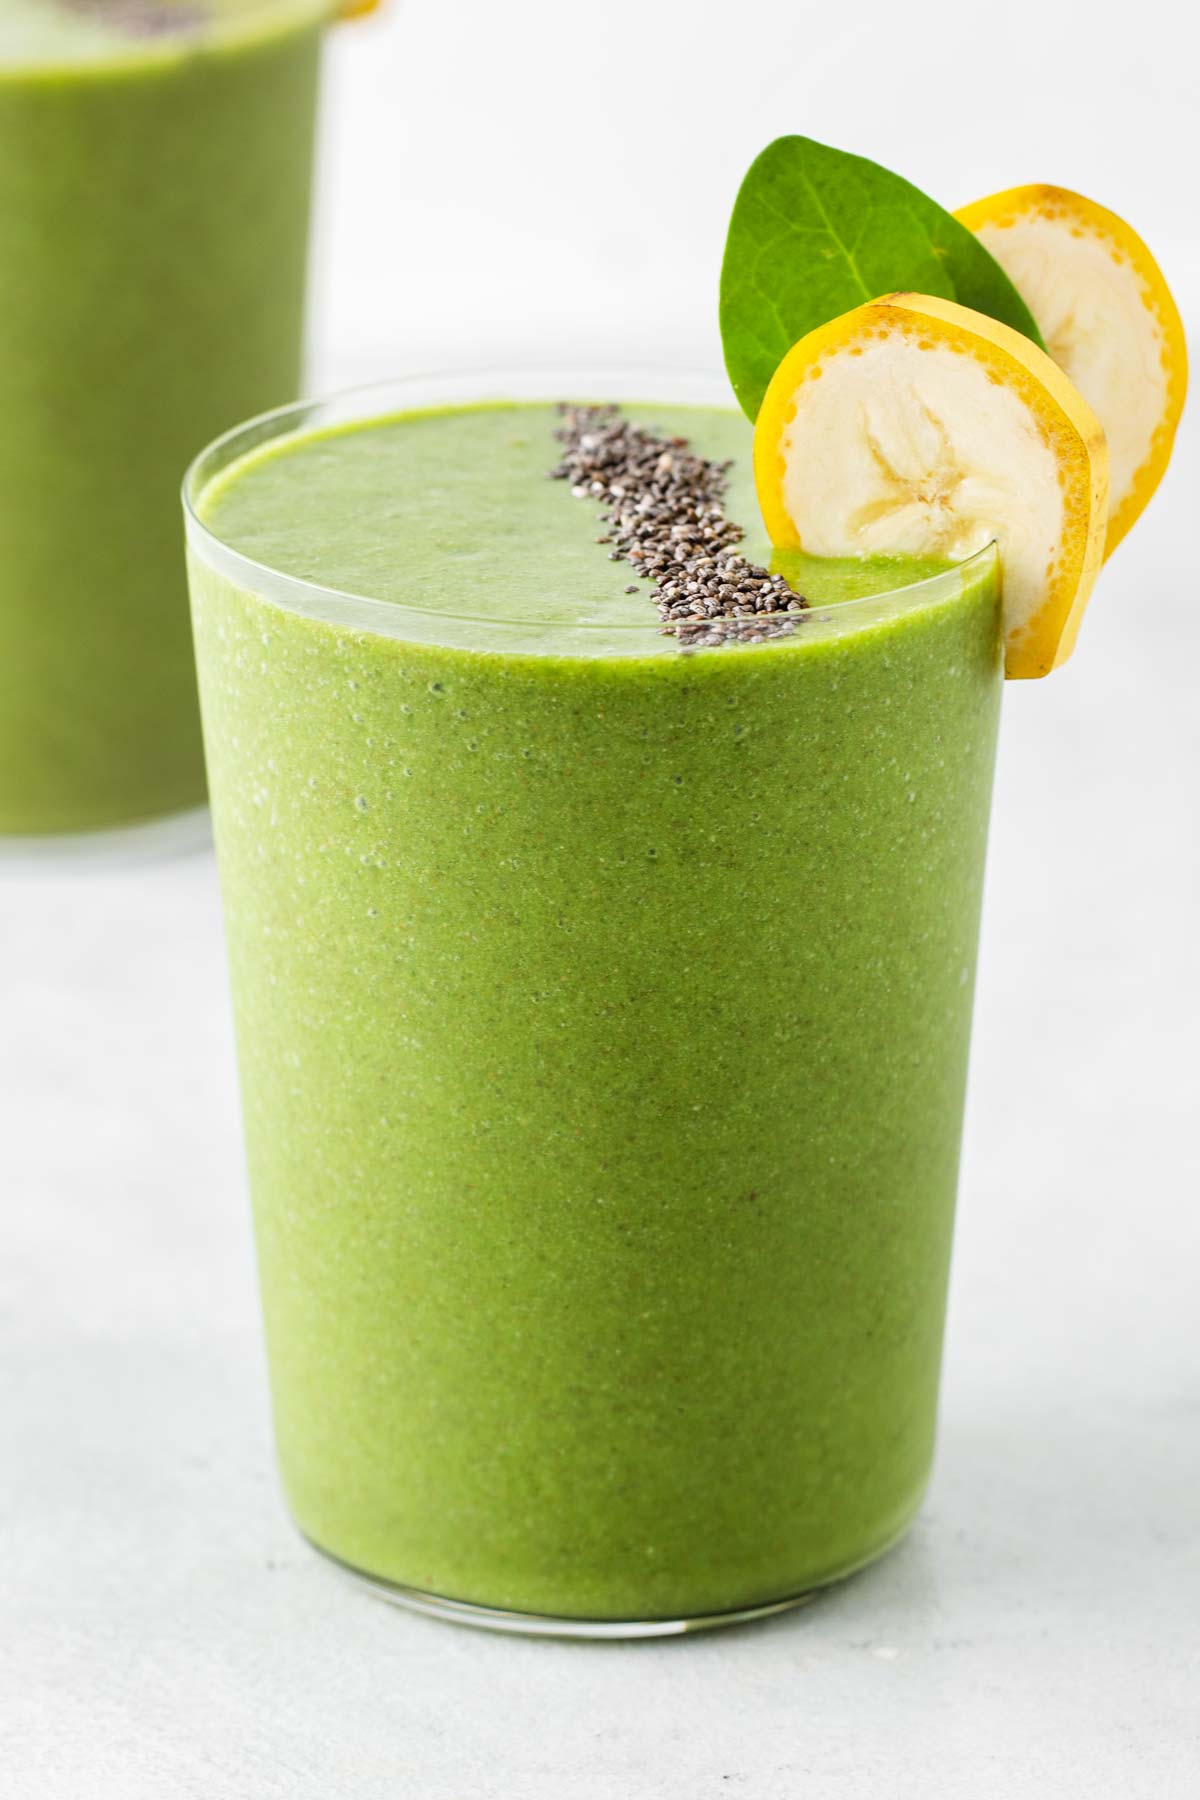 Spinach smoothie in a glass.